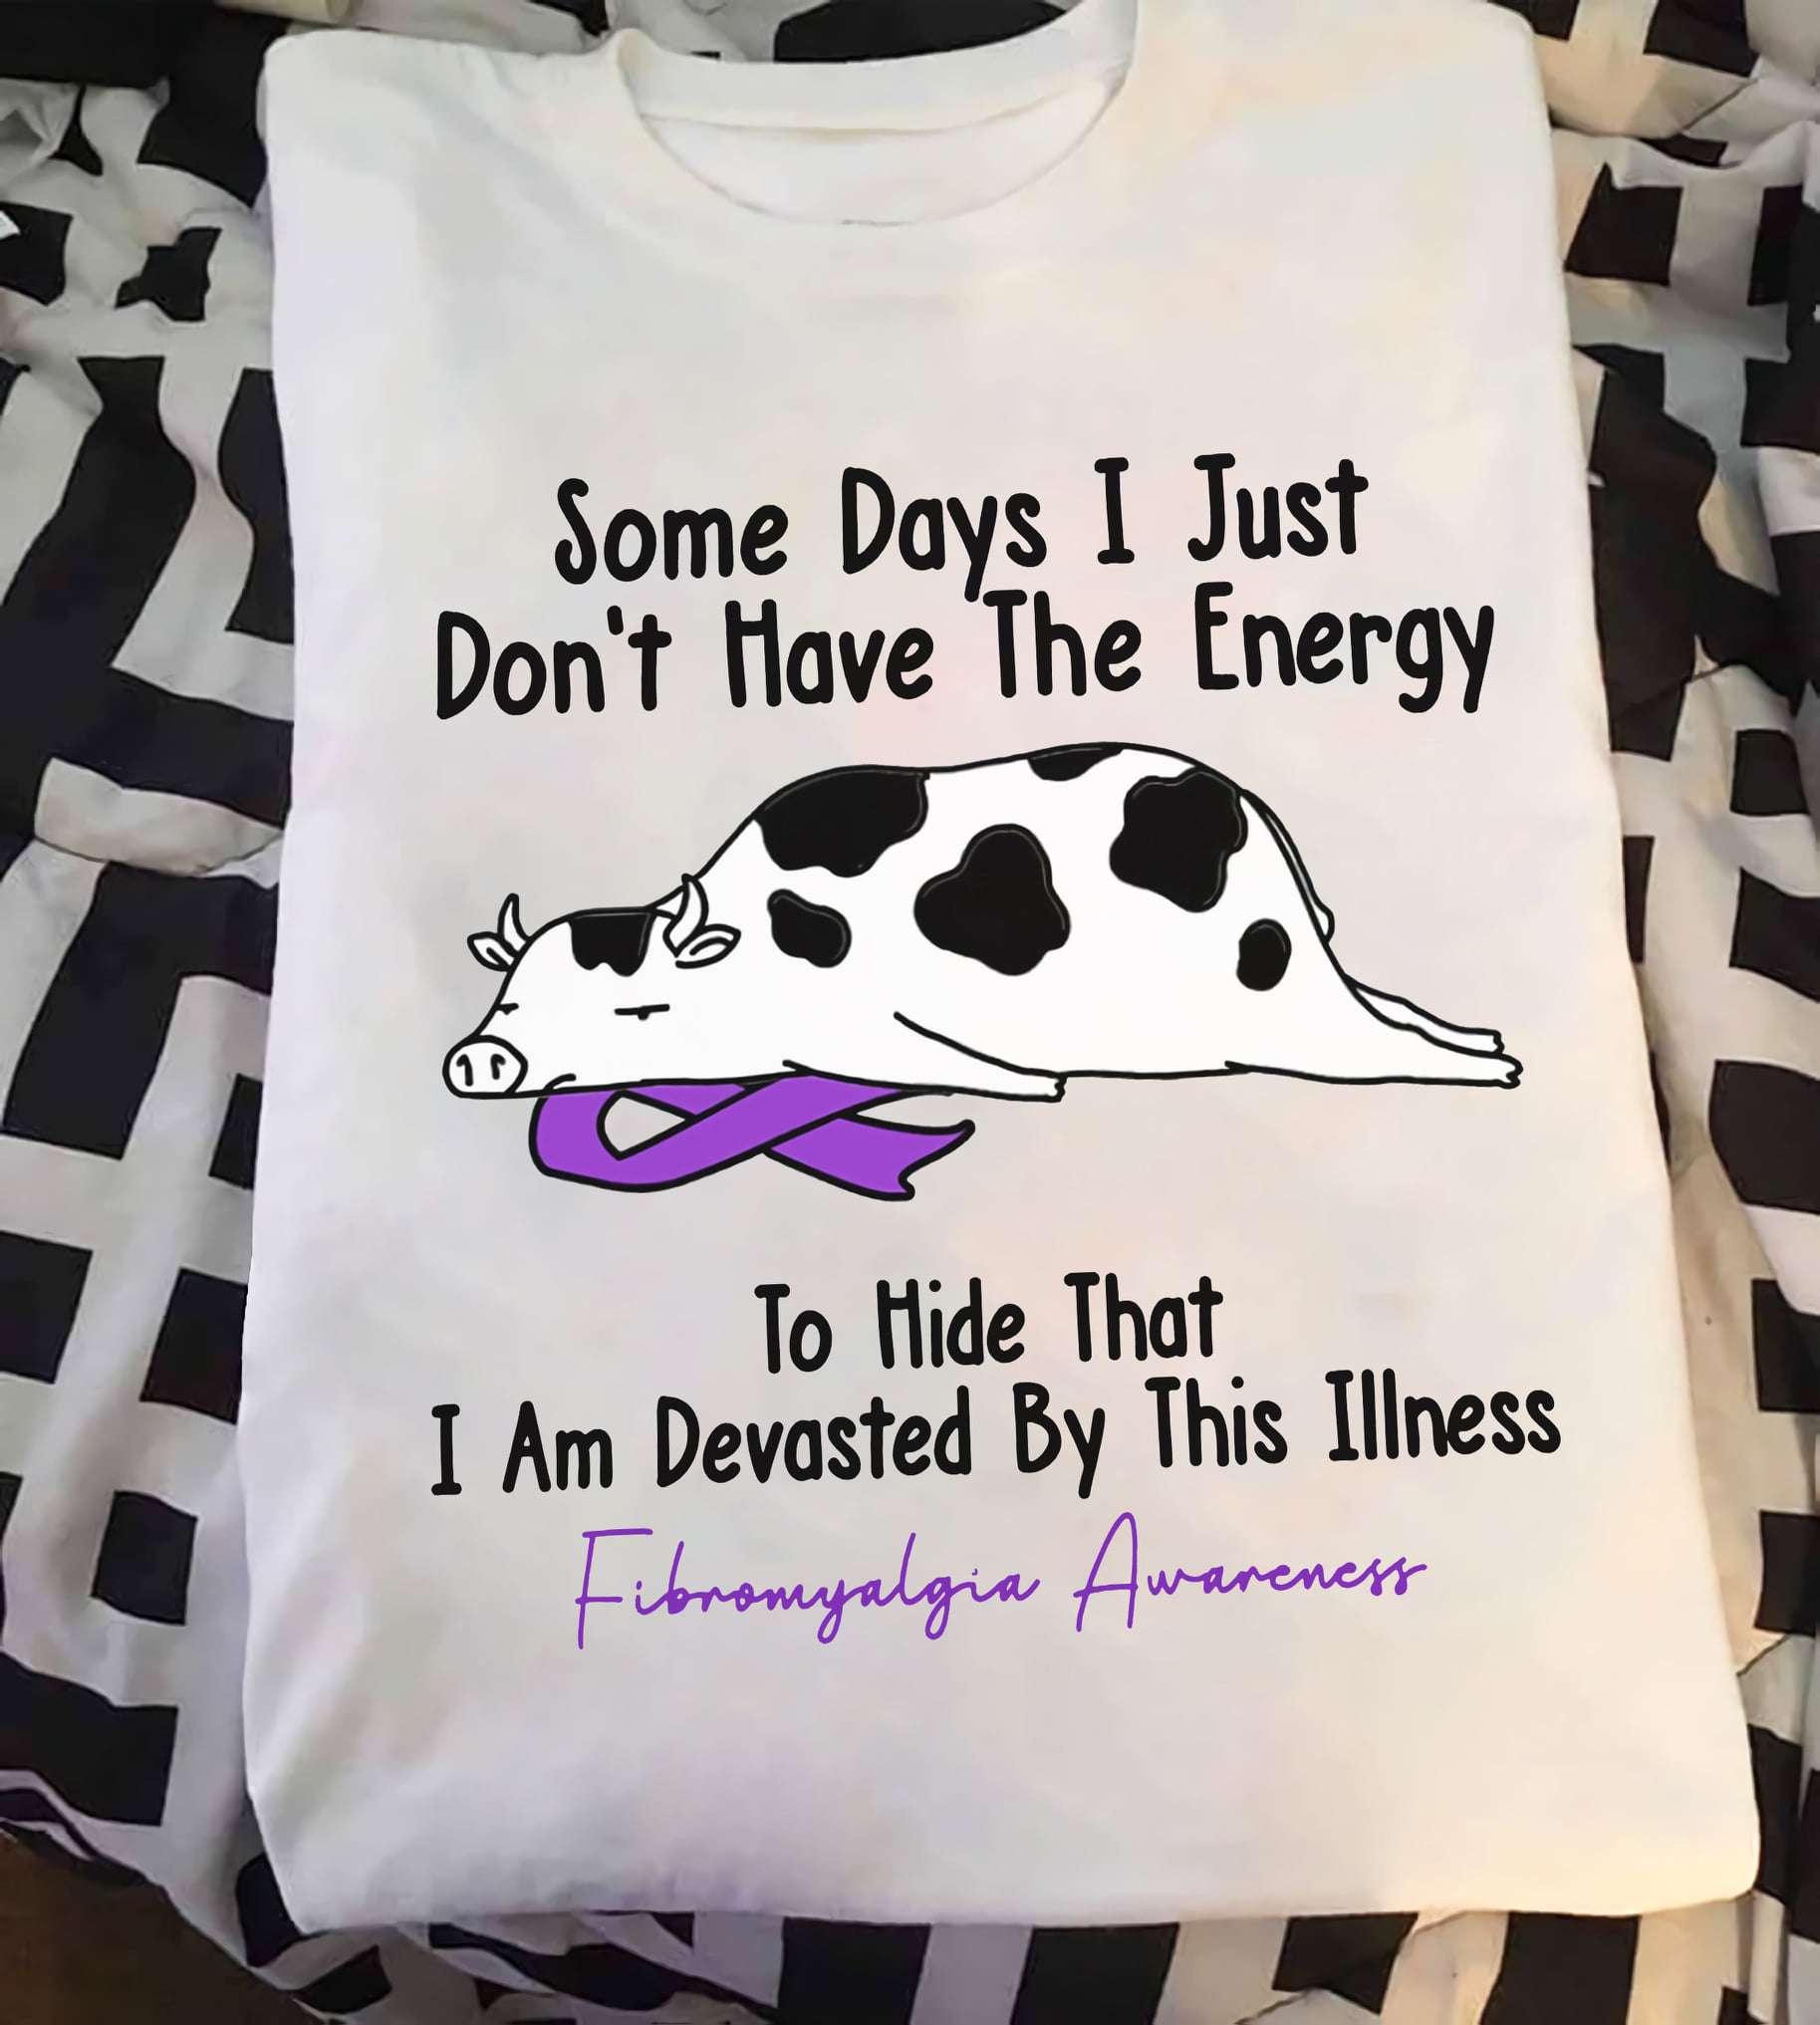 Dairy Cows Fibromyalgia - Some days i just don't have the energy to hide that i am devasted by this illness